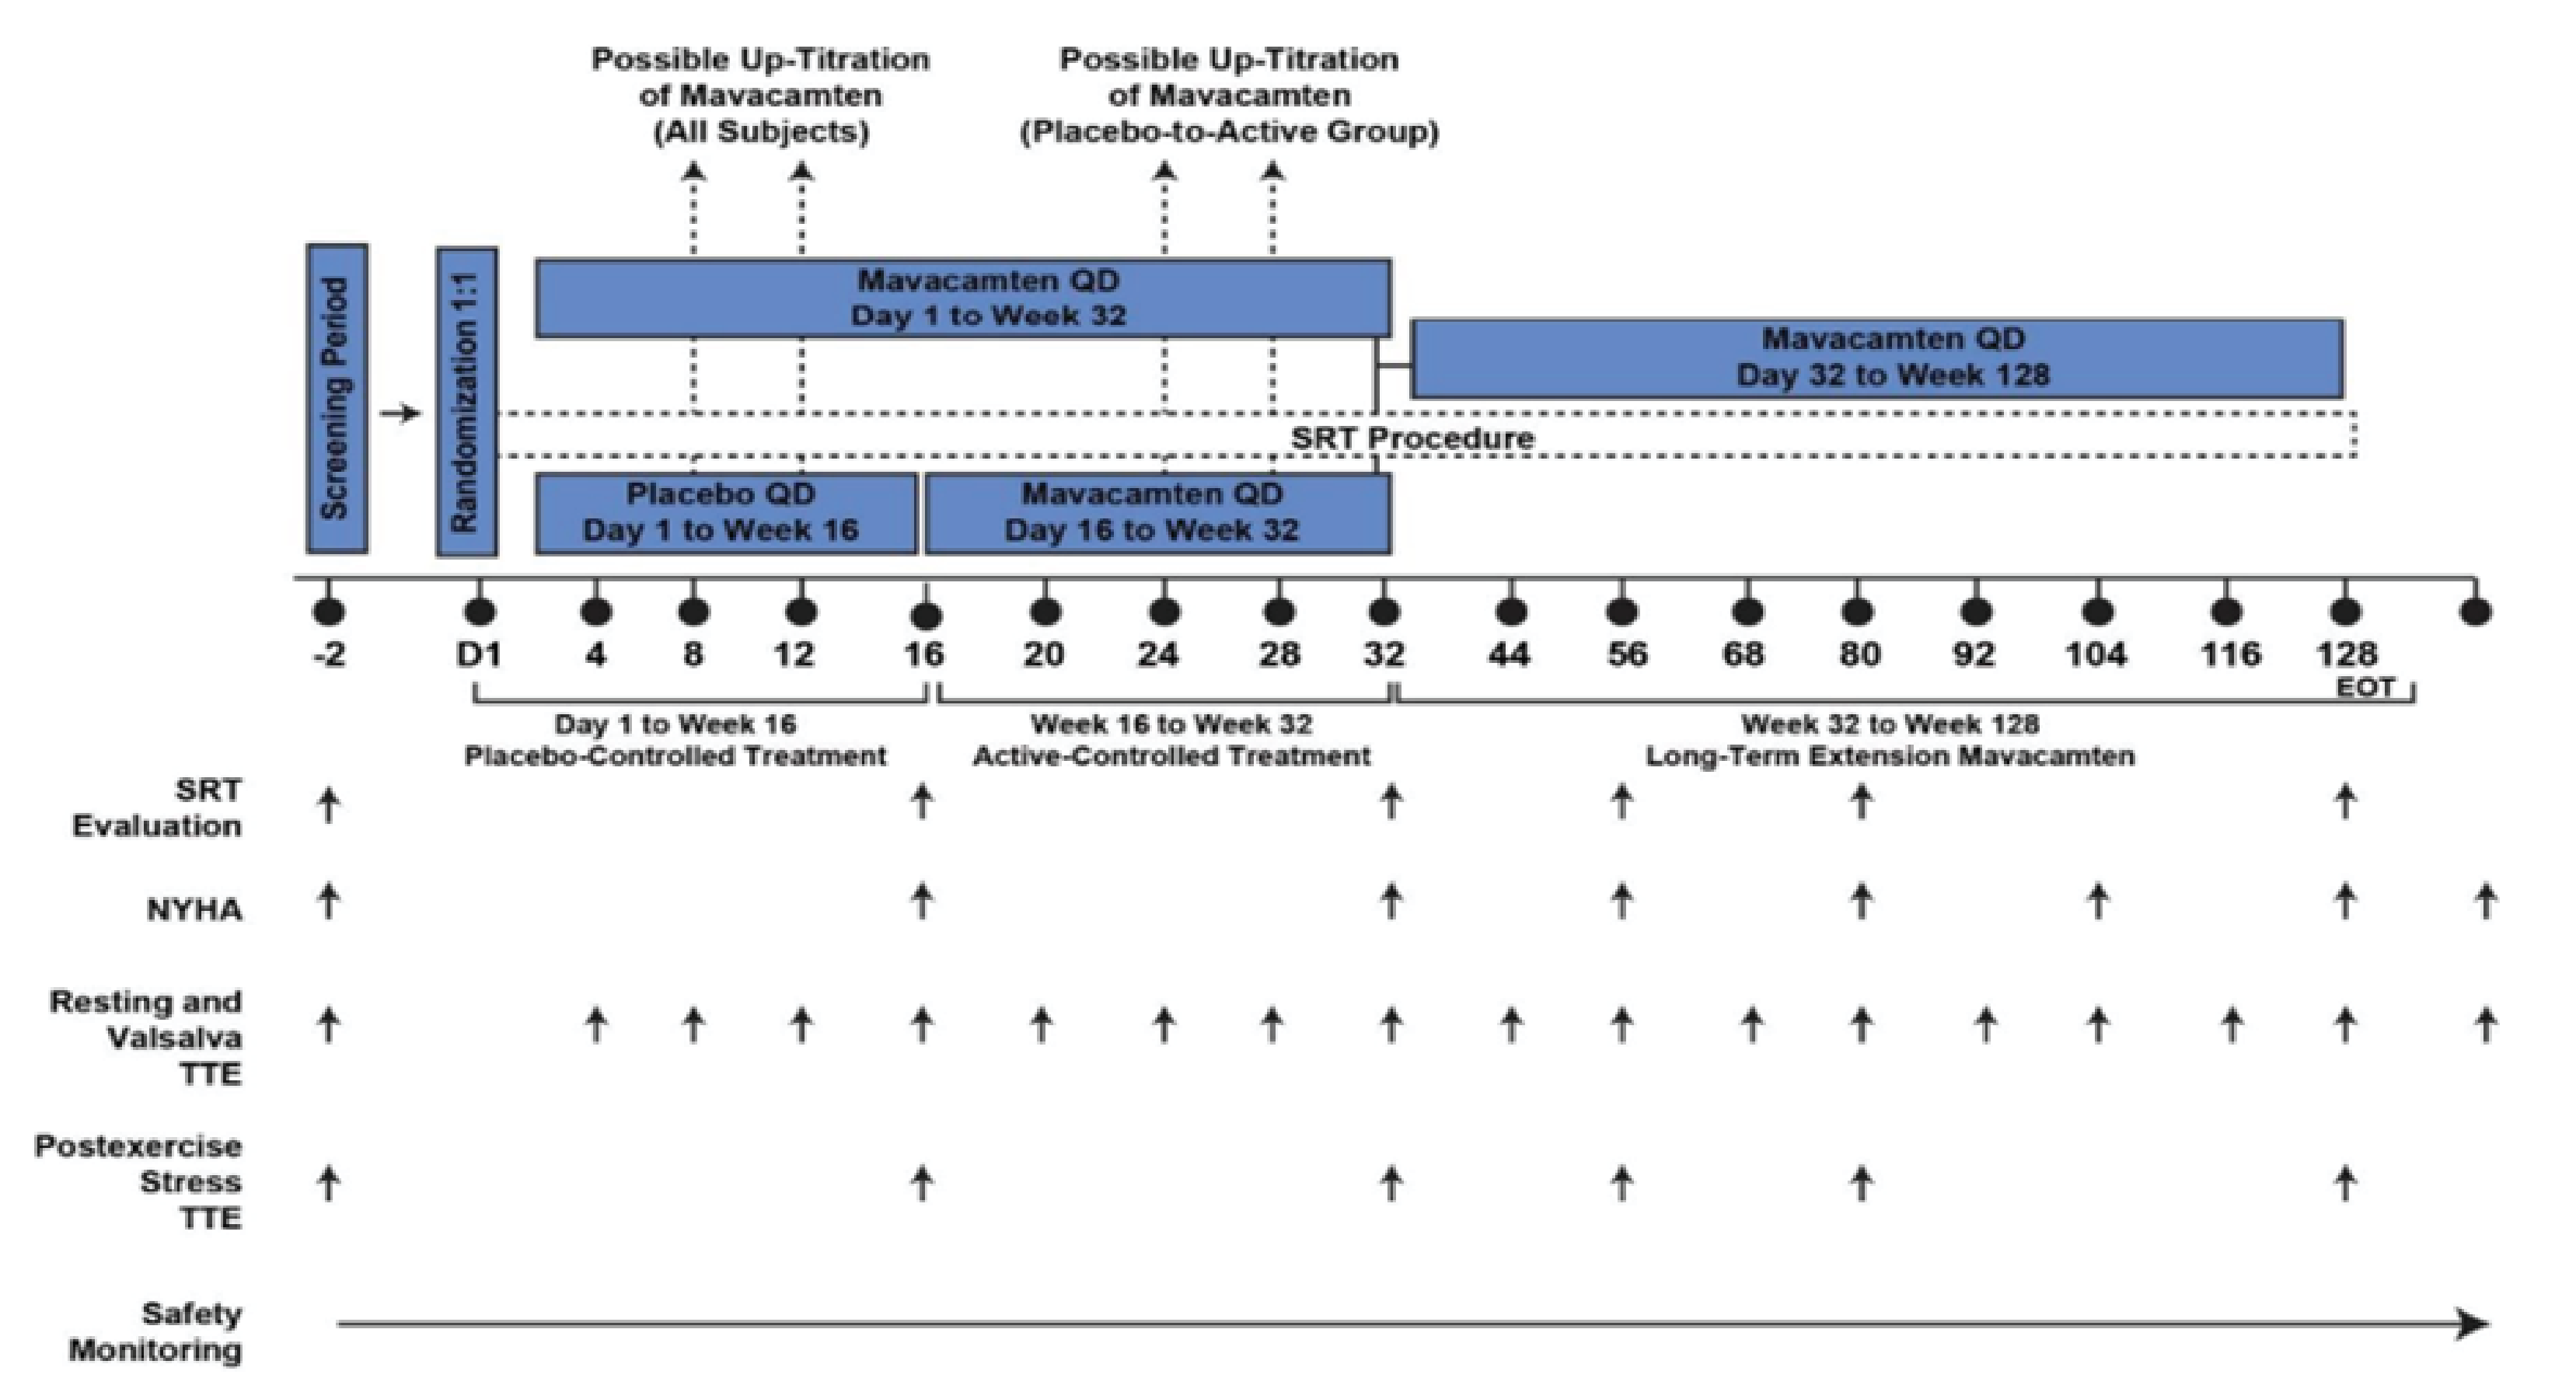 An overview of study design and key features of the VALOR-HCM trial including the screening period (2 weeks), placebo-controlled treatment period (16 weeks), active-controlled treatment period (16 weeks), LTE period (96 weeks), and post-treatment period (8 weeks).